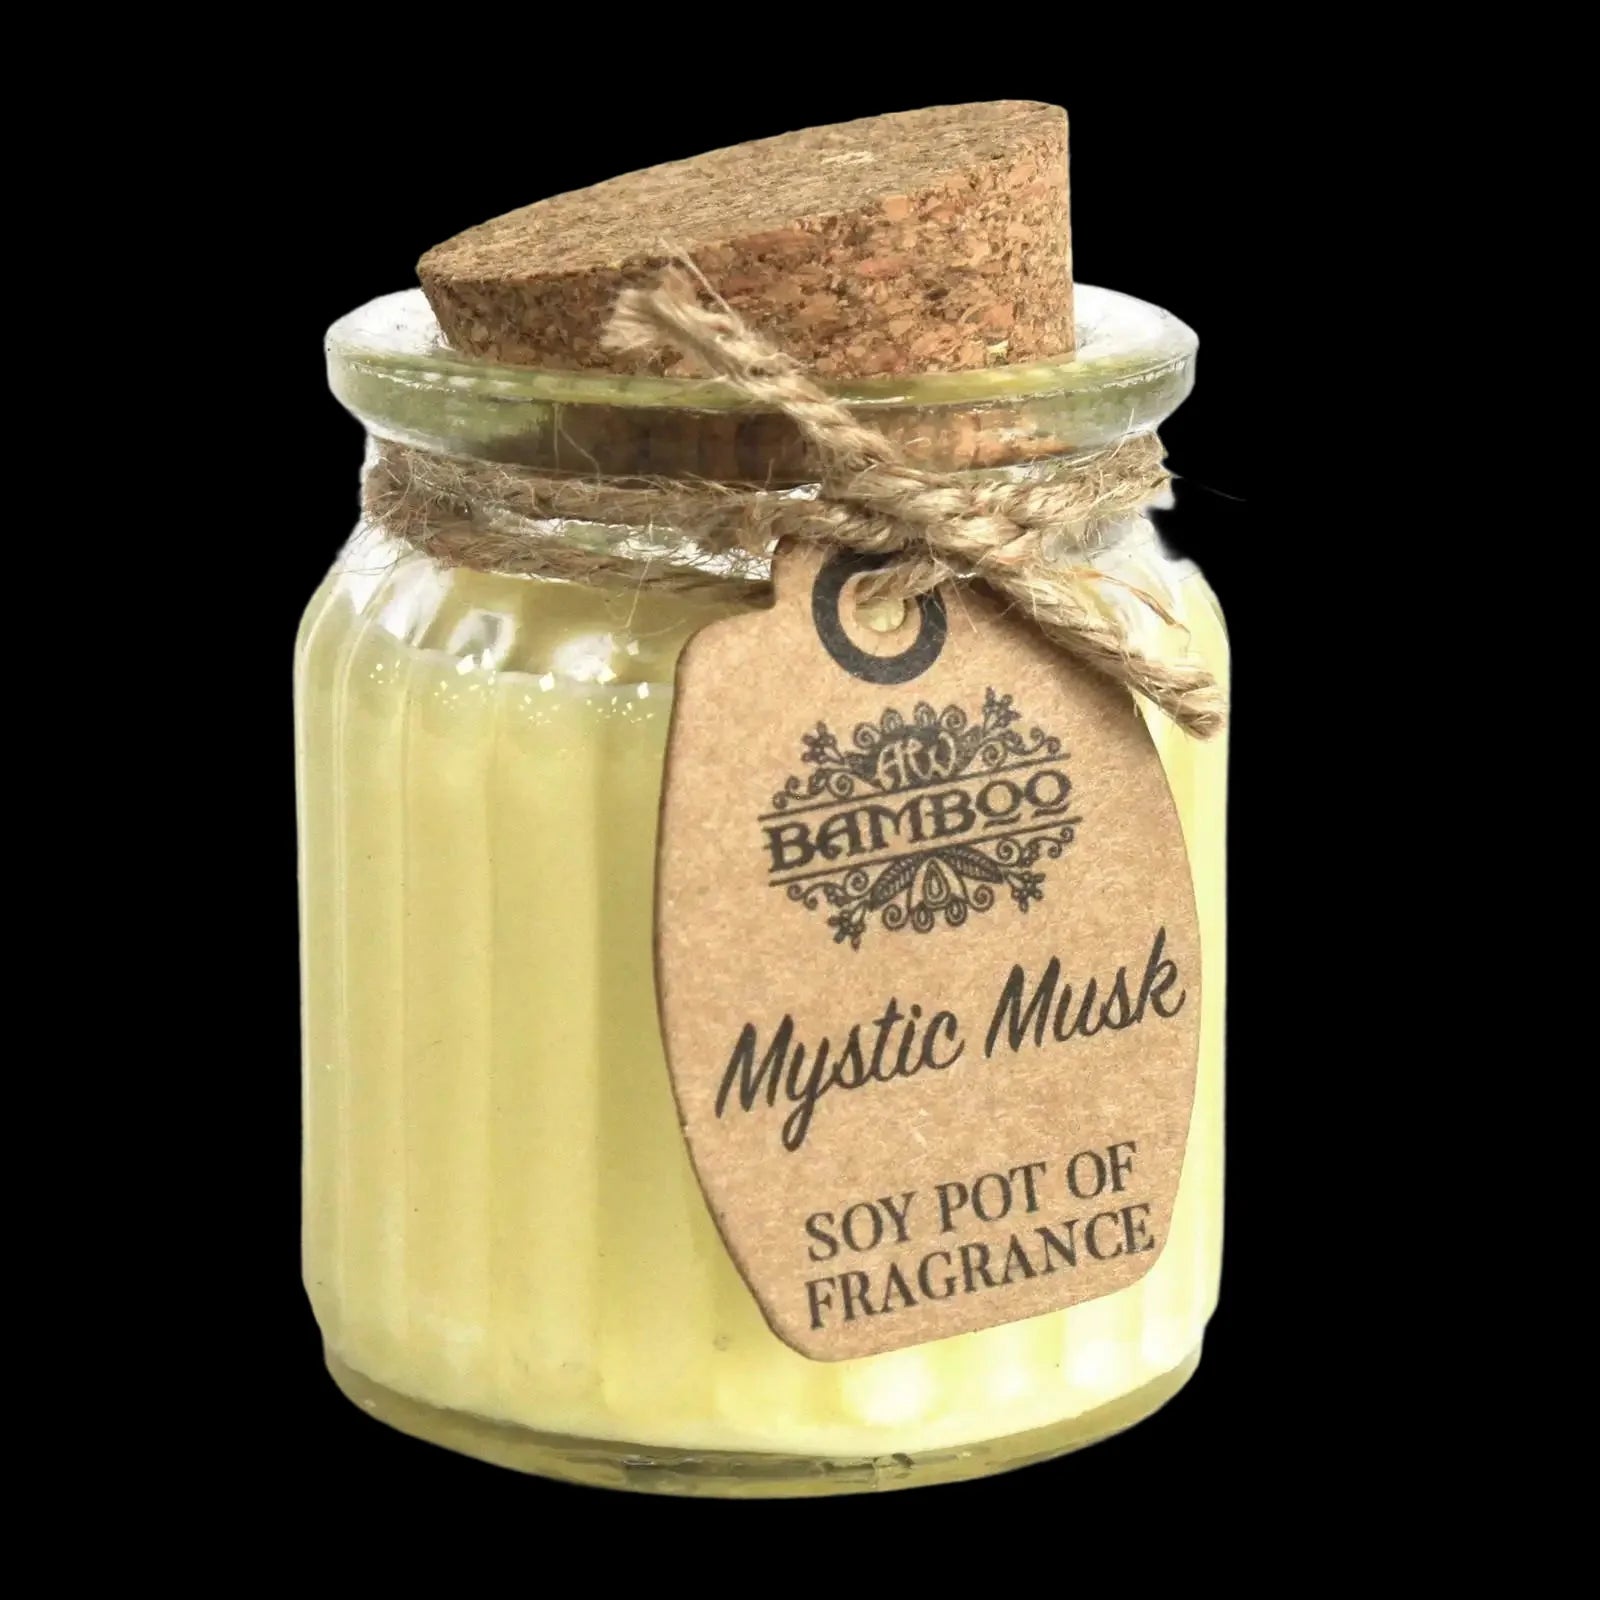 Mystic Musk Soy Pot Of Fragrance Candles - Ancient Wisdom